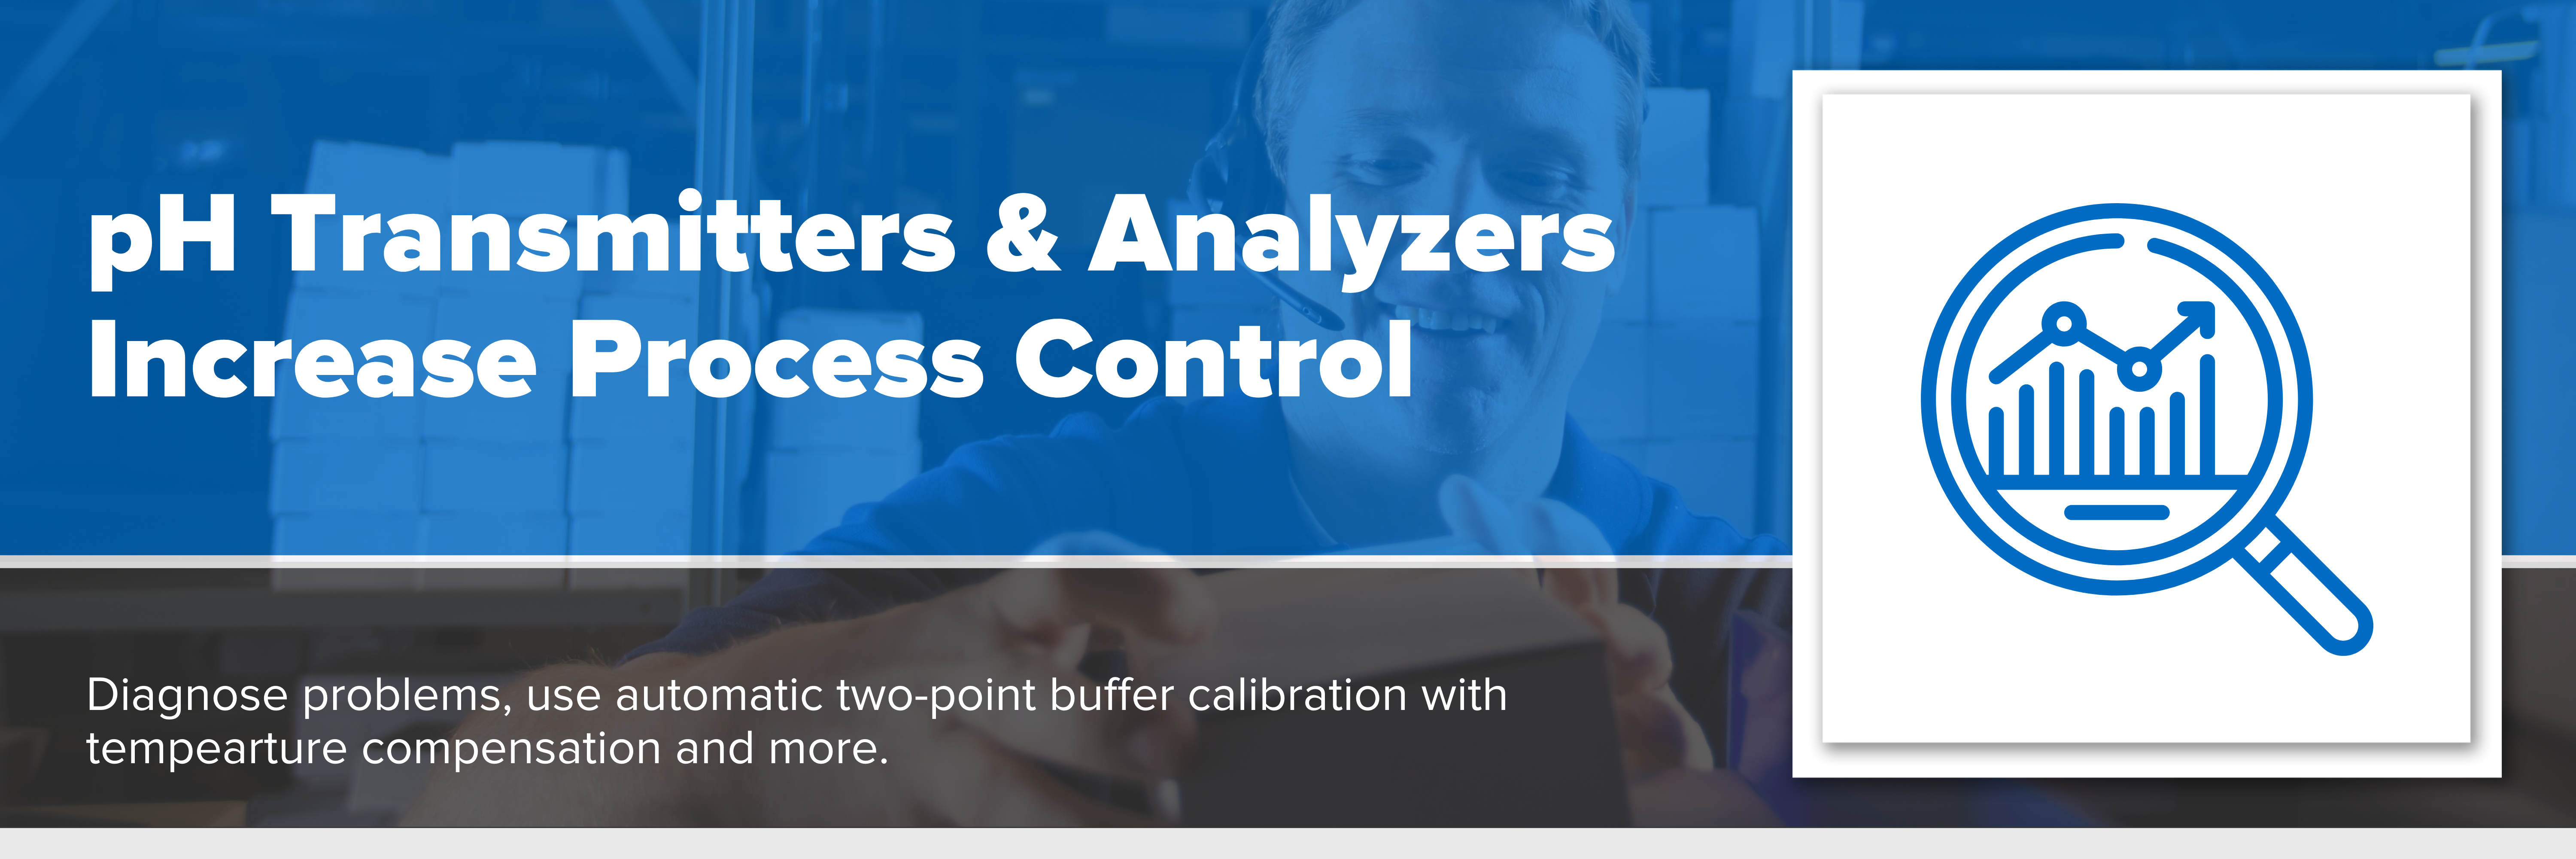 Header image with text "pH Transmitters & Analyzers Increase Process Control."